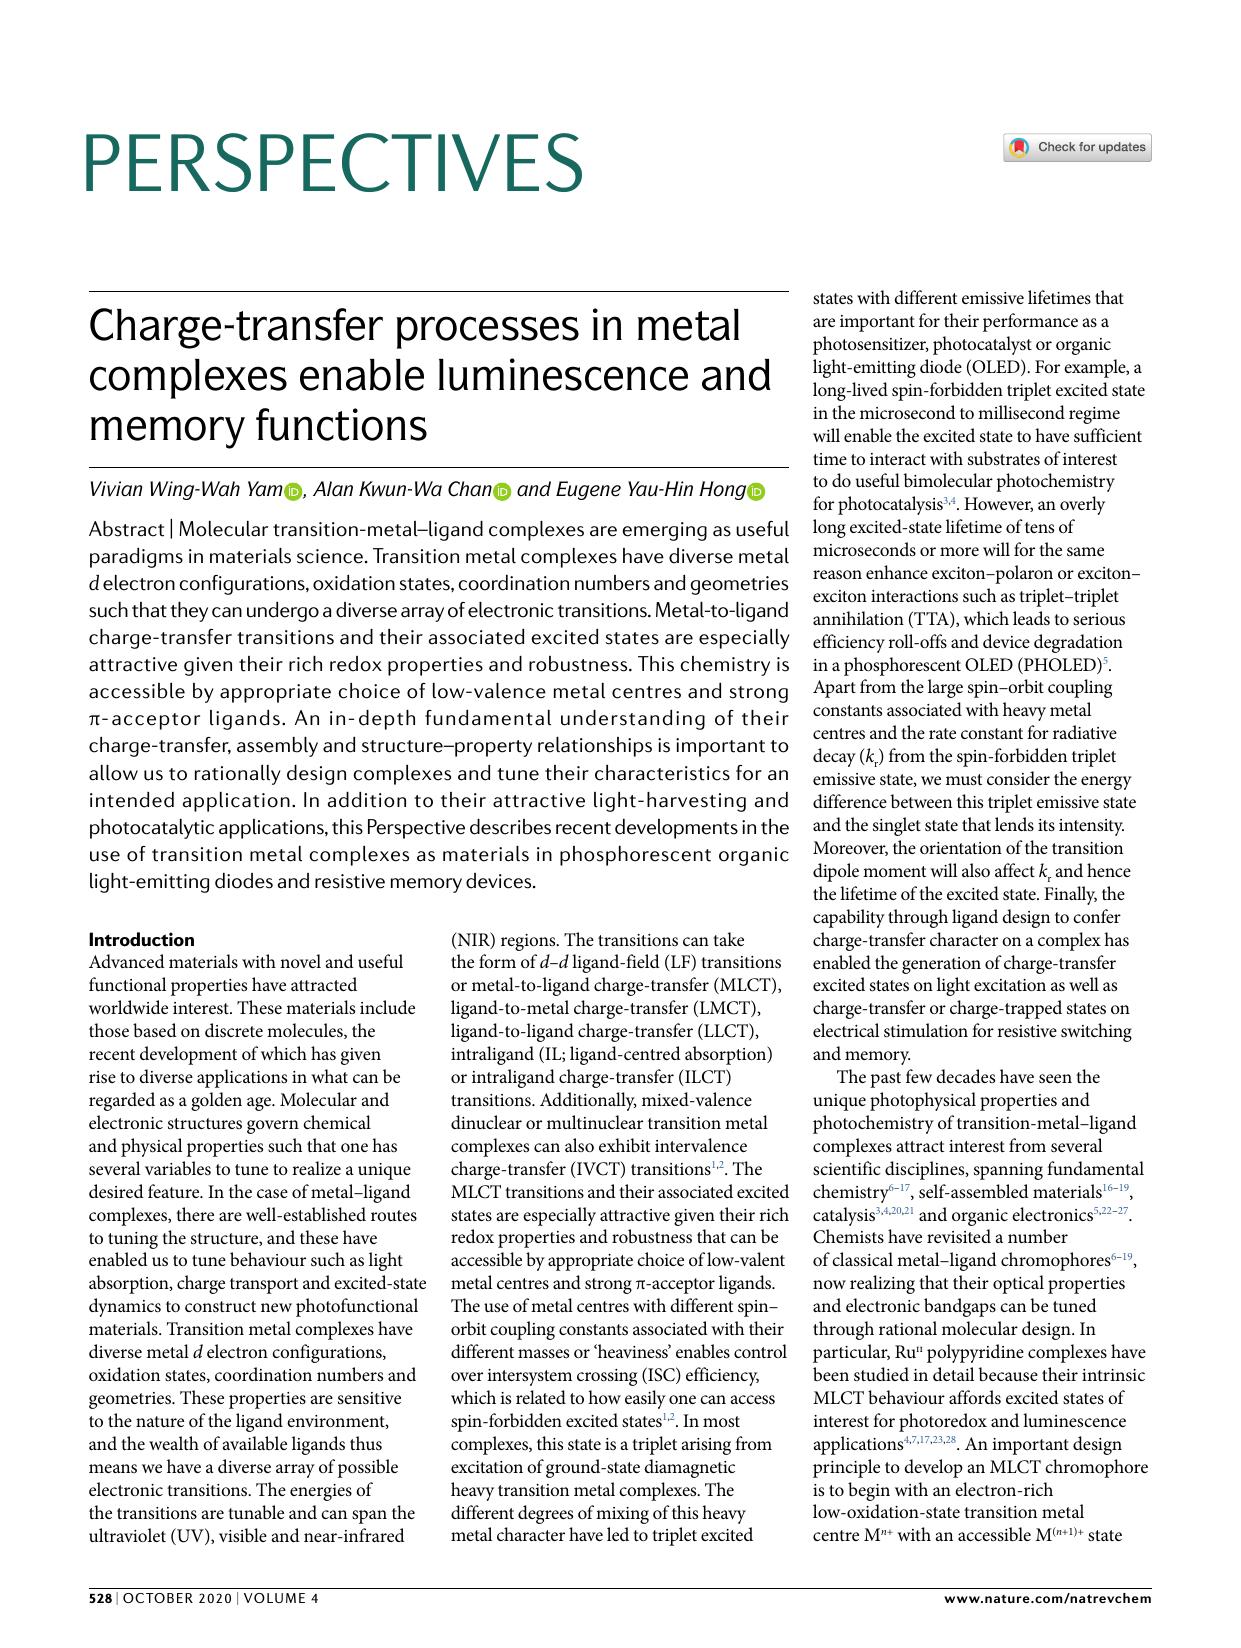 Charge-transfer processes in metal complexes enable luminescence and memory functions by Vivian Wing-Wah Yam & Alan Kwun-Wa Chan & Eugene Yau-Hin Hong